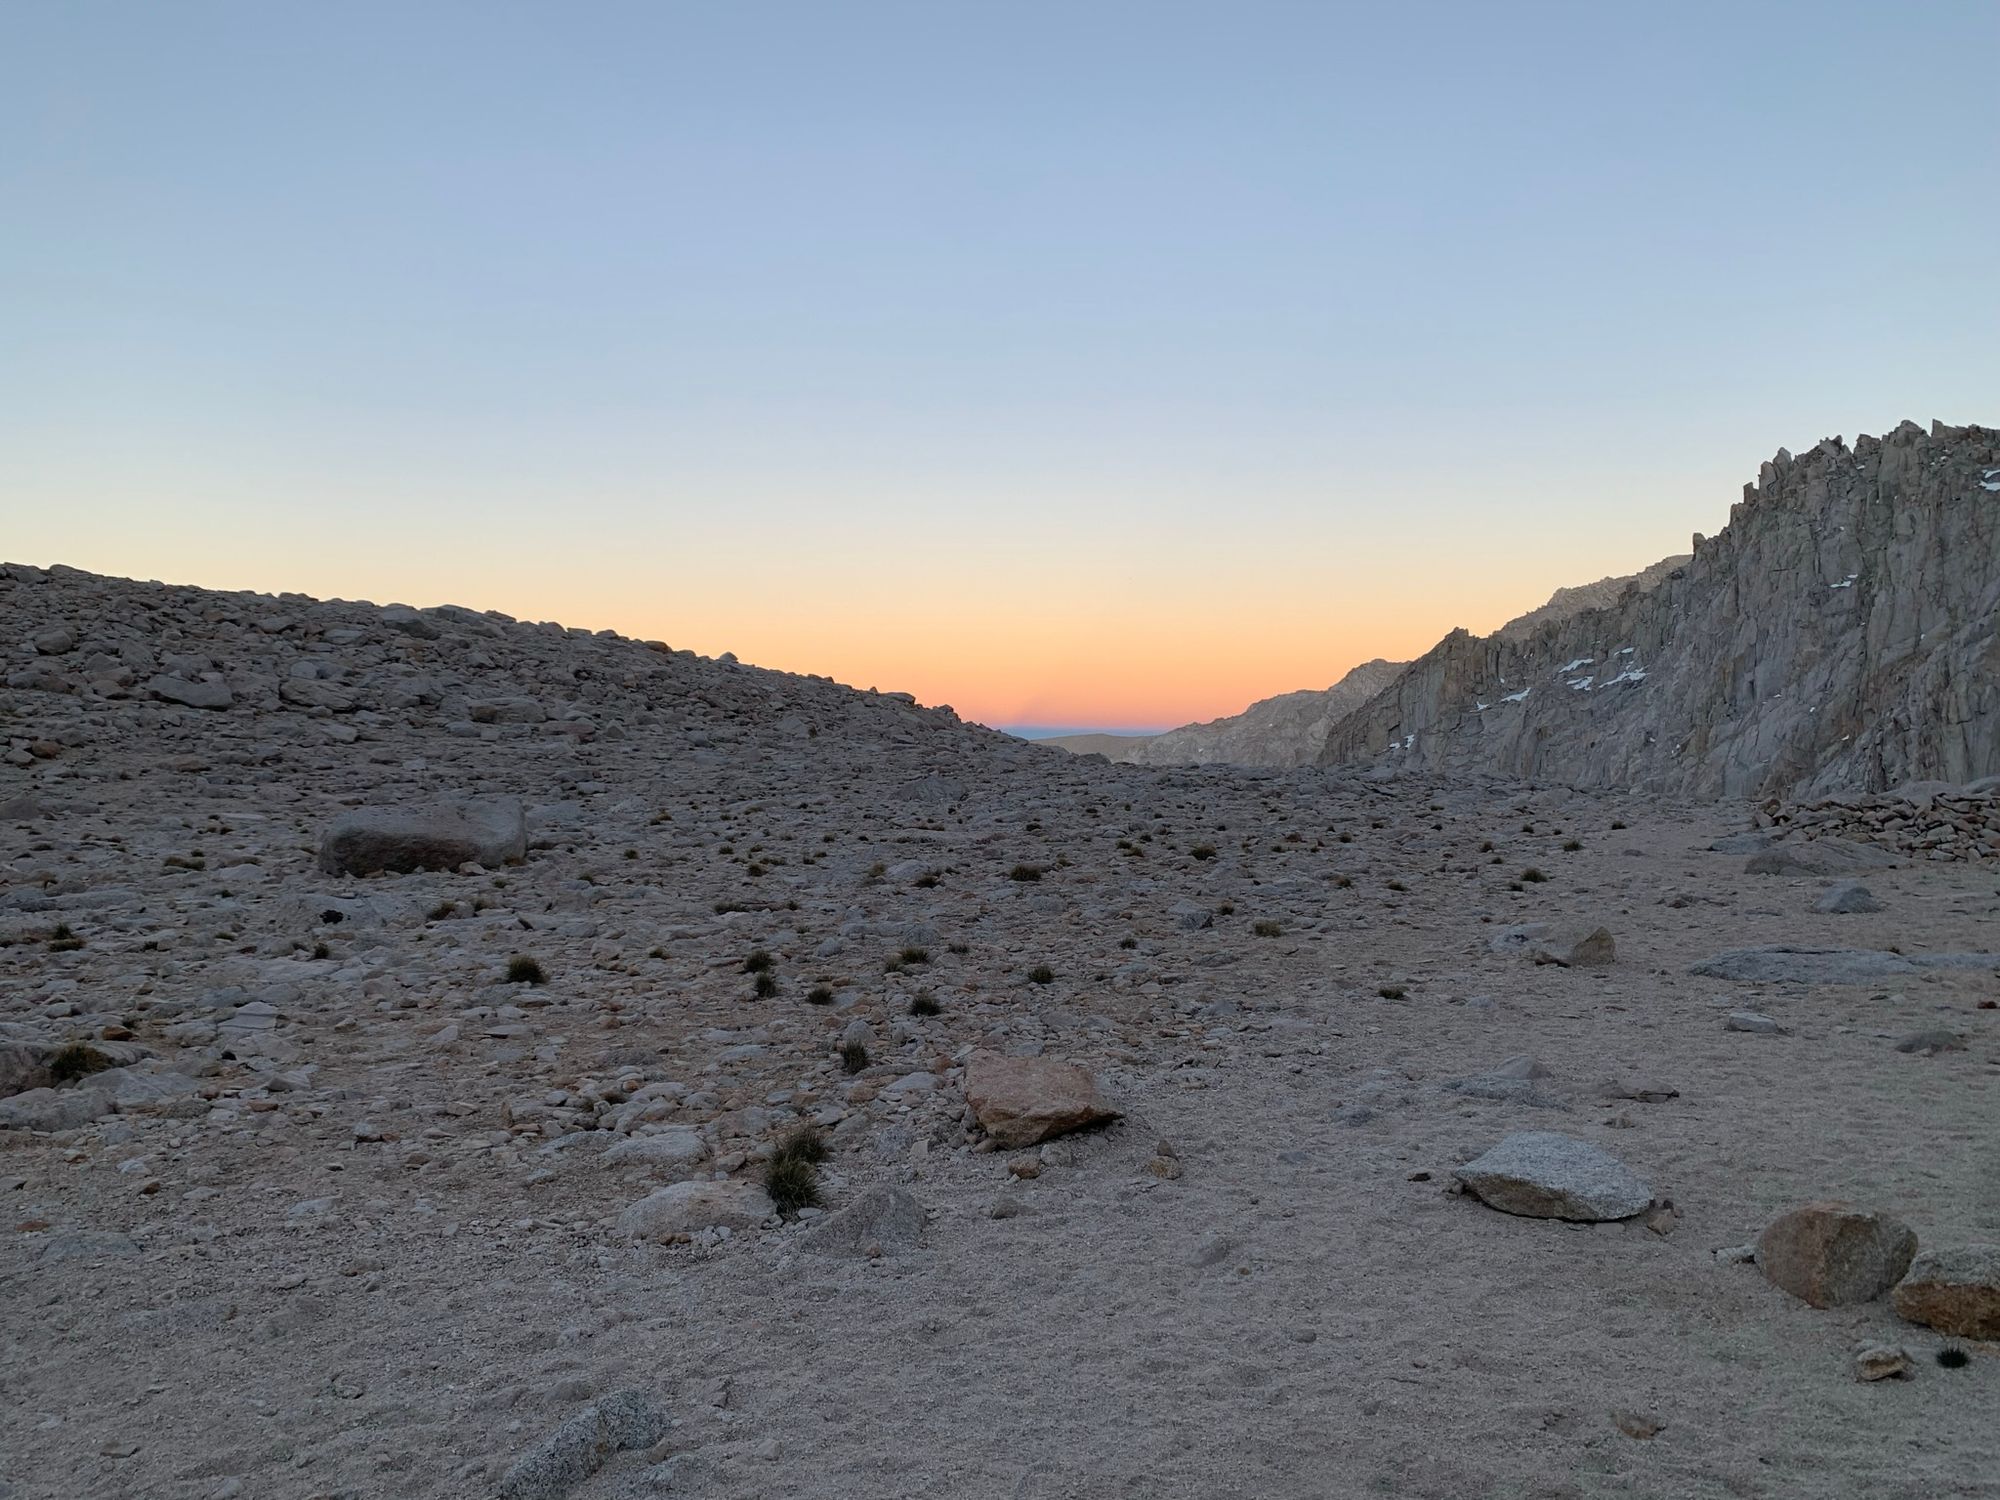 East Buttress of Mt Whitney